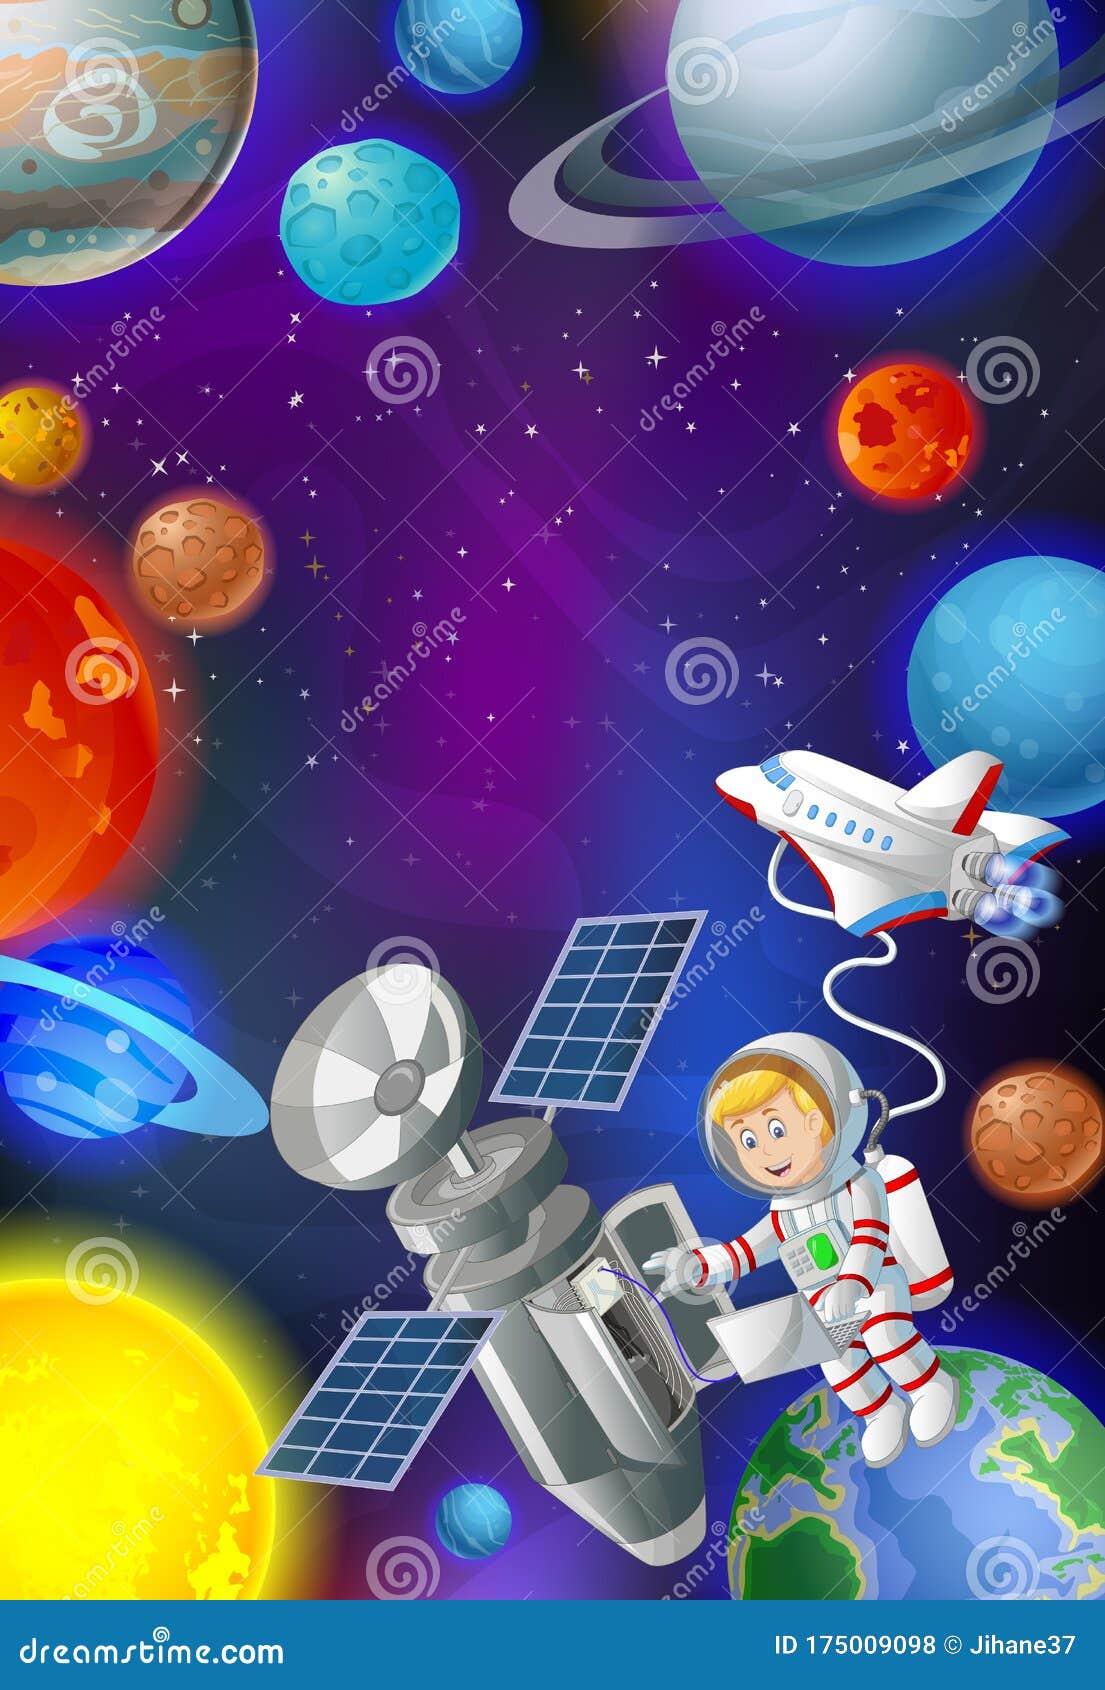 cool astronaut with satelite and rocker airplane in space cartoon